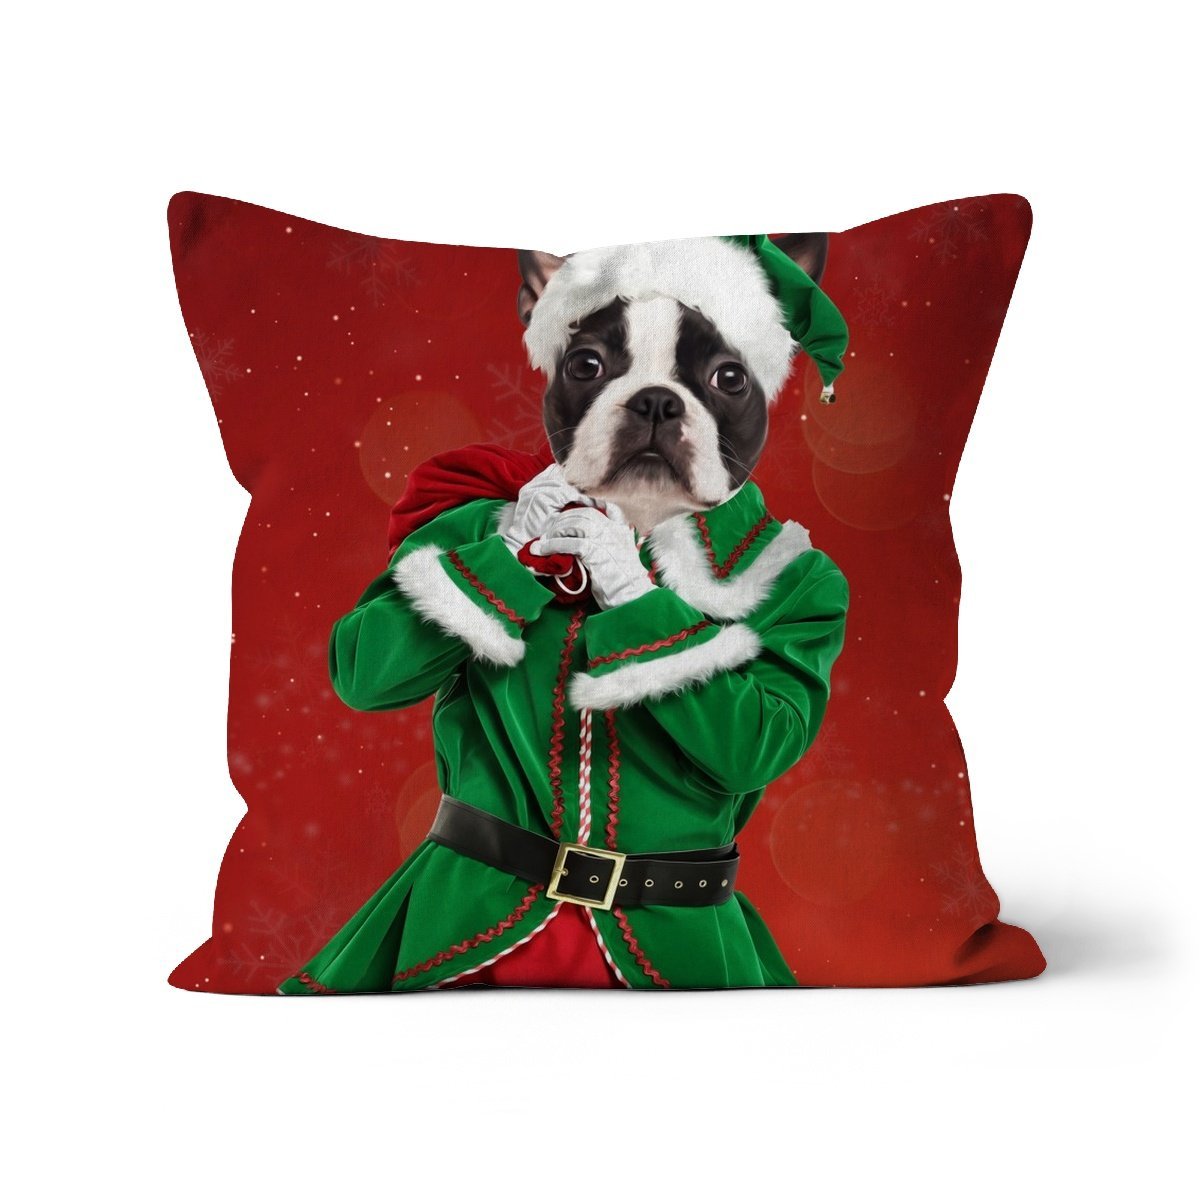 The Male Elf: Custom Pet Cushion - Paw & Glory - #pet portraits# - #dog portraits# - #pet portraits uk#paw and glory, custom pet portrait cushion,dog pillow custom, custom pet pillows, pup pillows, pillow with dogs face, dog pillow cases